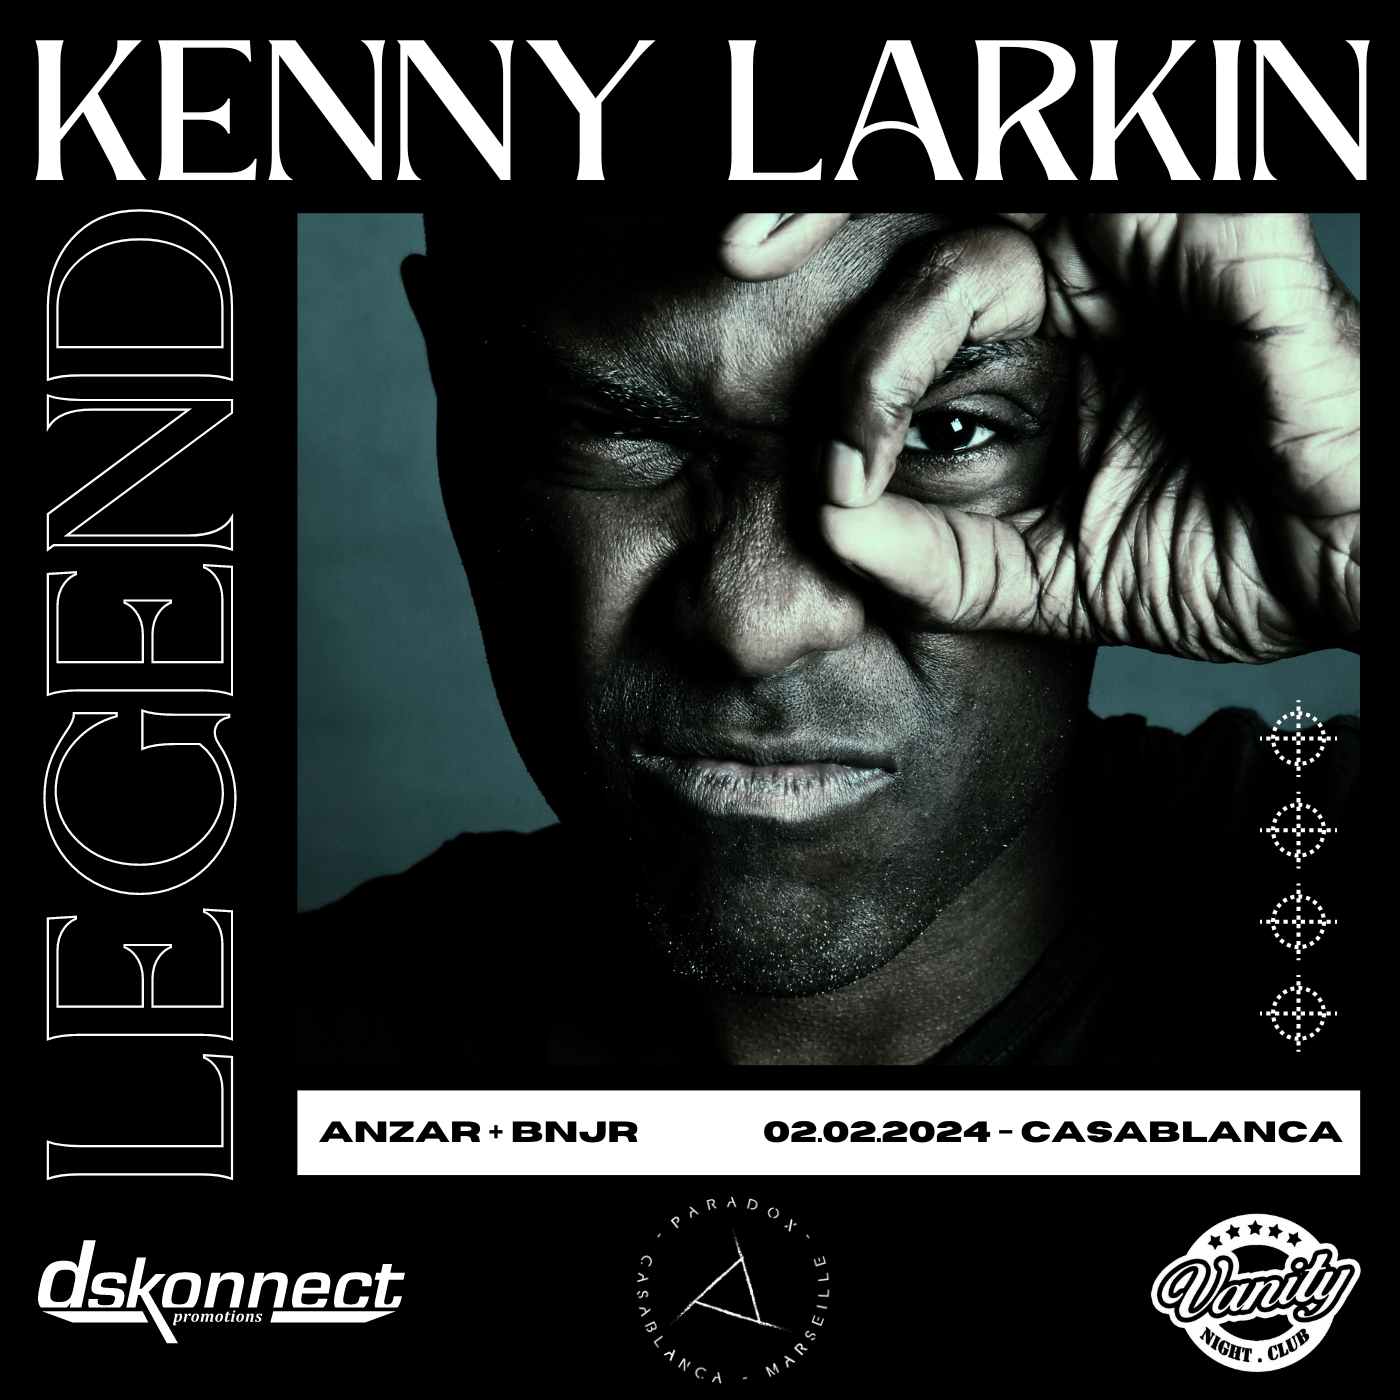 Artwork of Paradox event with Kenny Larkin on Feb 2, 2024 at Vanity Club